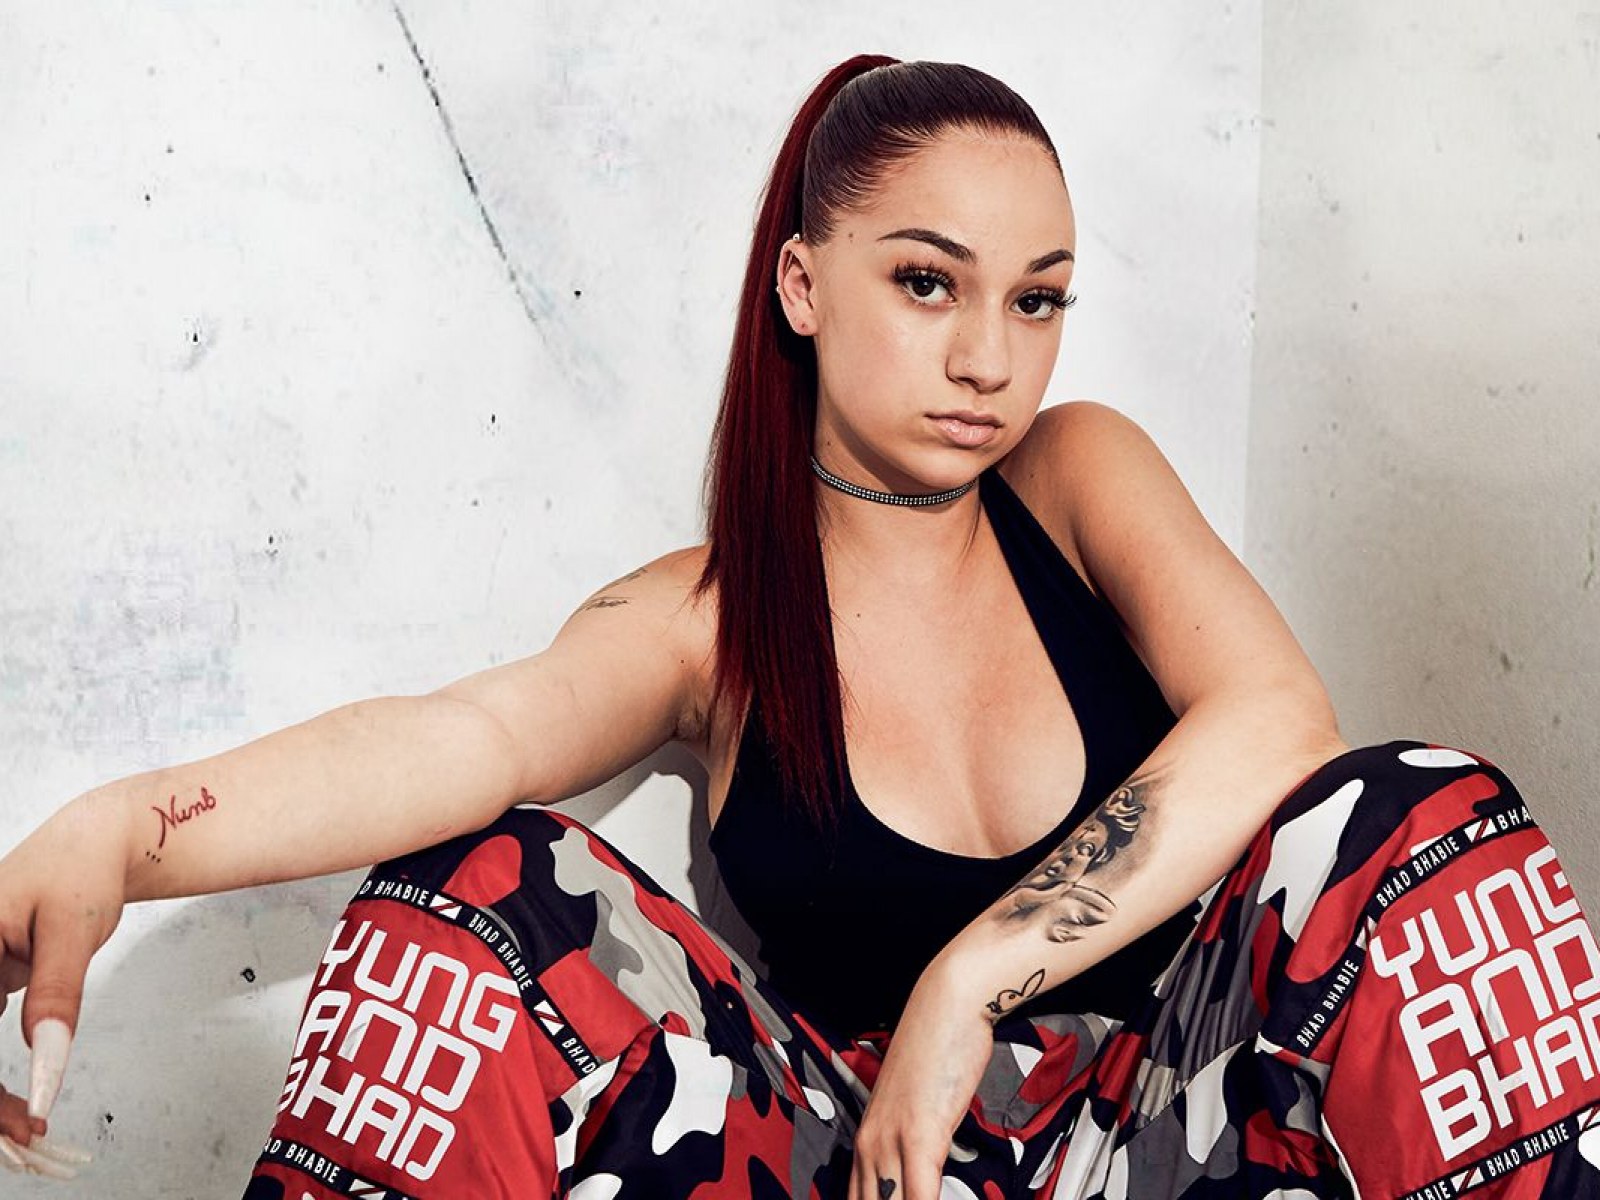 Bhad Bhabie / Bhad Bhabie Is The Face Of Copycat Beauty / Last seen 1